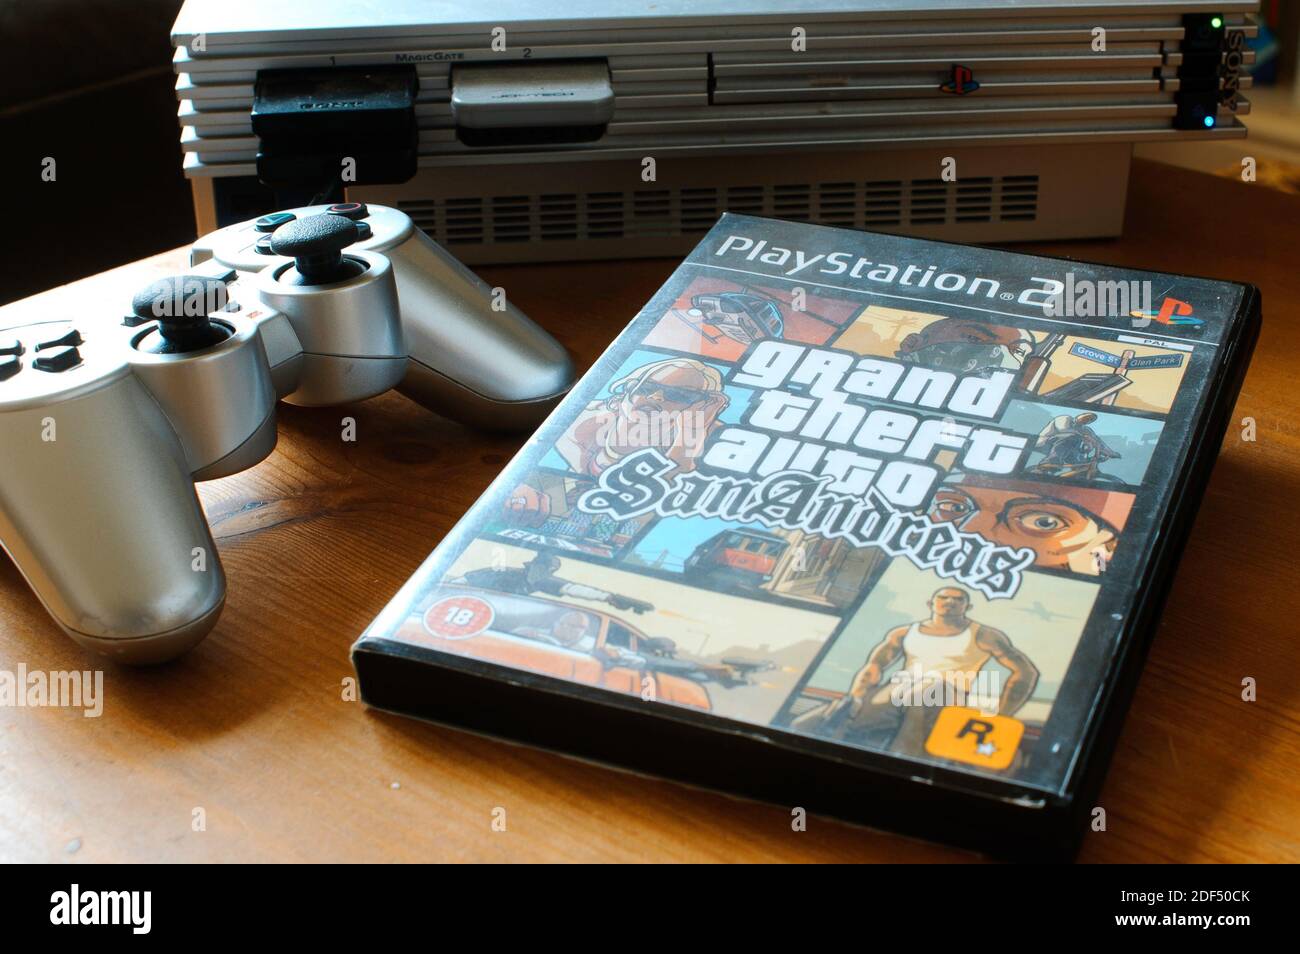 Grand Theft Auto, San Andreas Video Game for the PlayStation 2, Launched in 2004 as the seventh title in the series Stock Photo